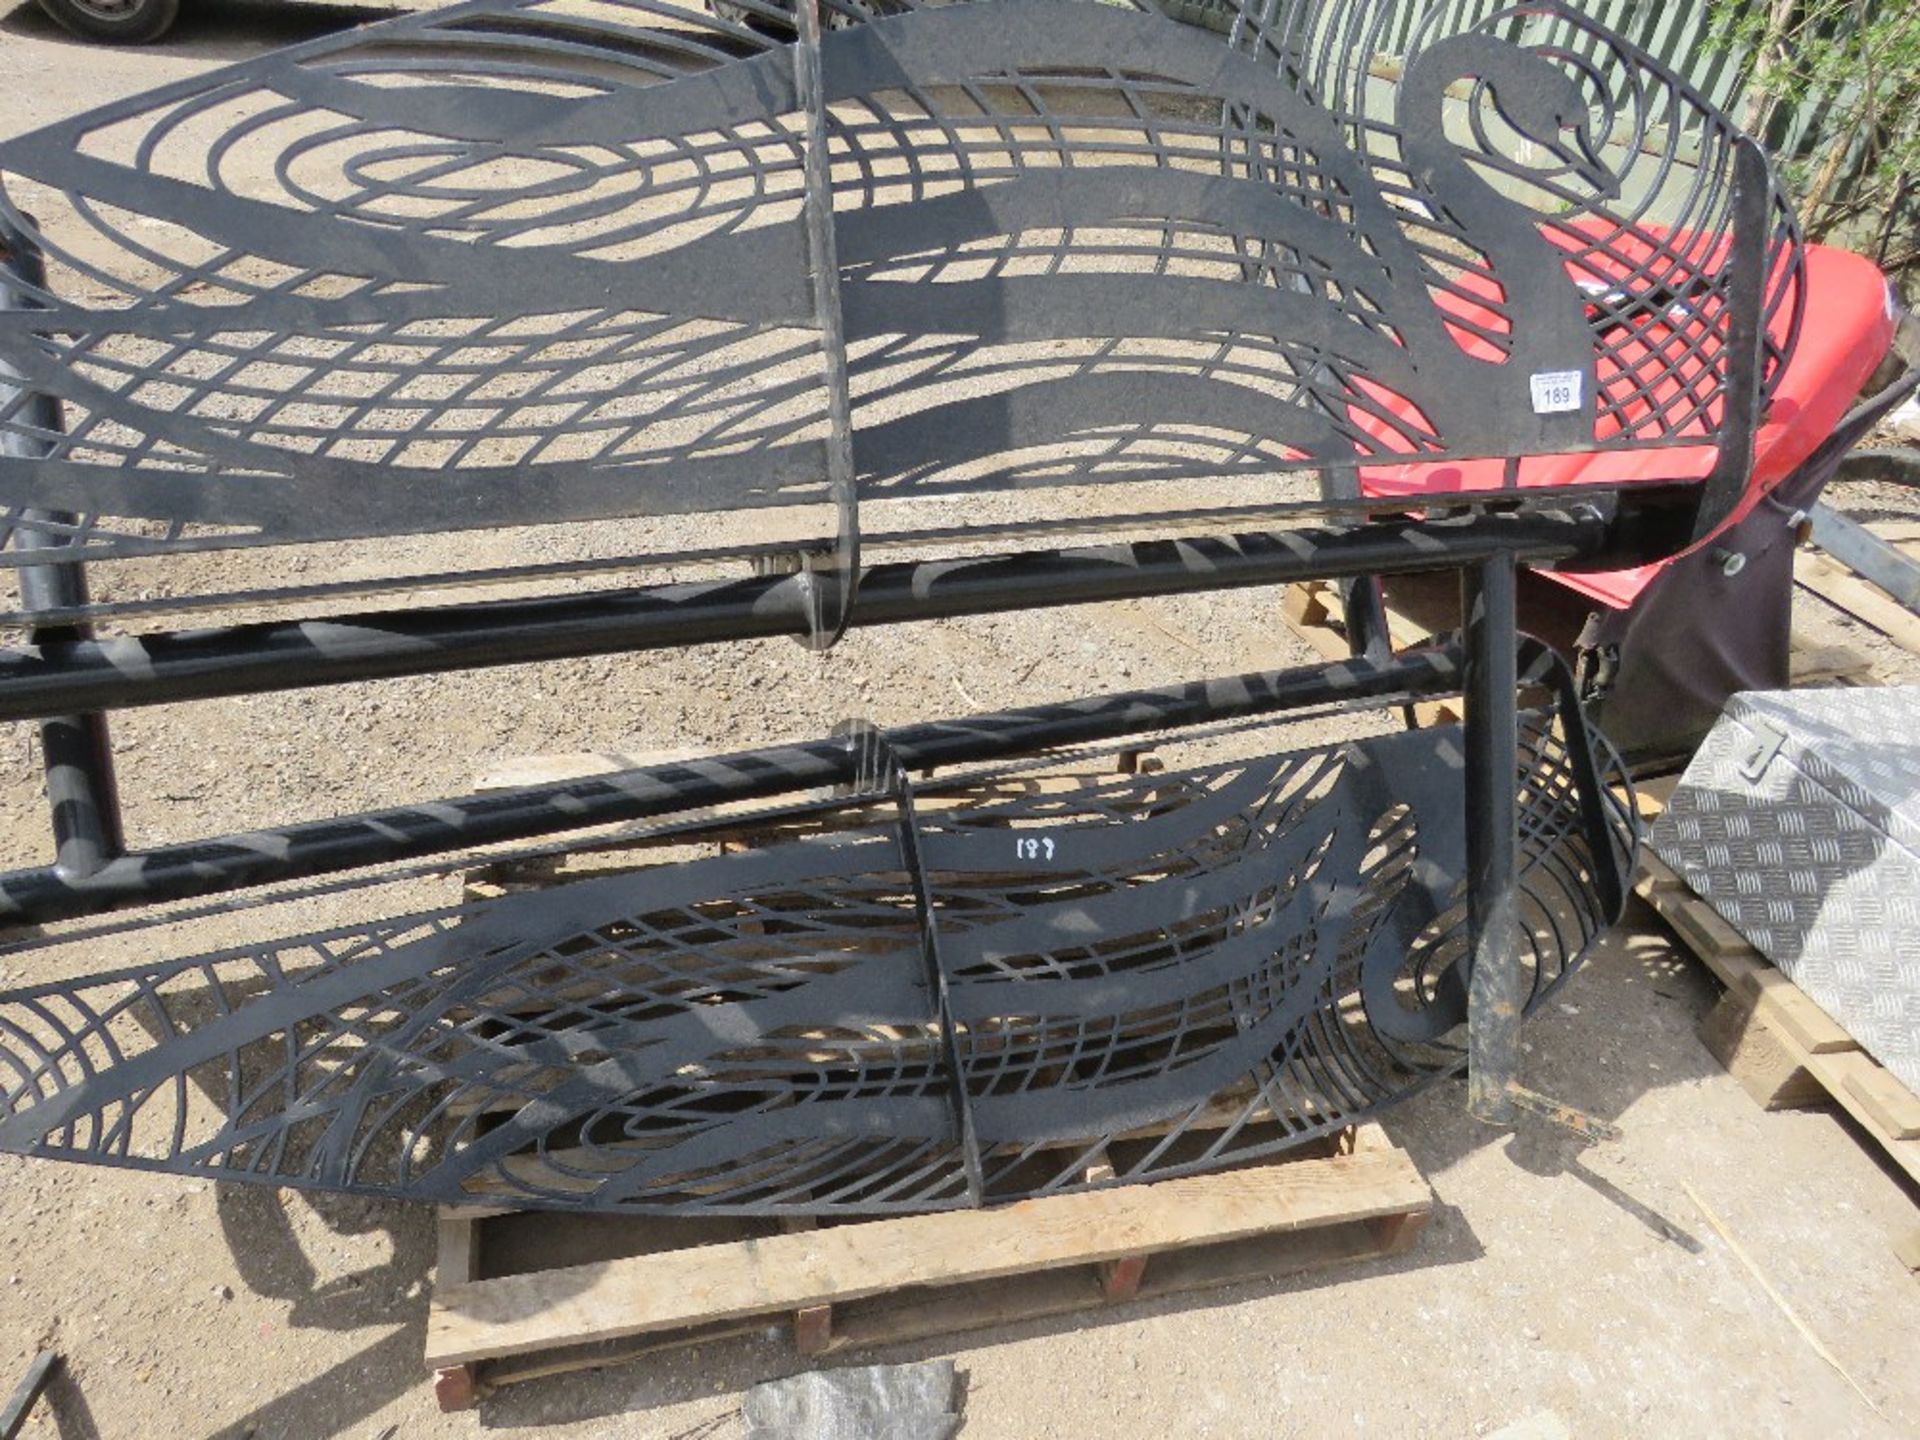 2 X HEAVY DUTY LASER CUT DECORATIVE STEEL BENCHES DEPICTING SWANS. NEVER INSTALLED. 2M WIDE APPROX.